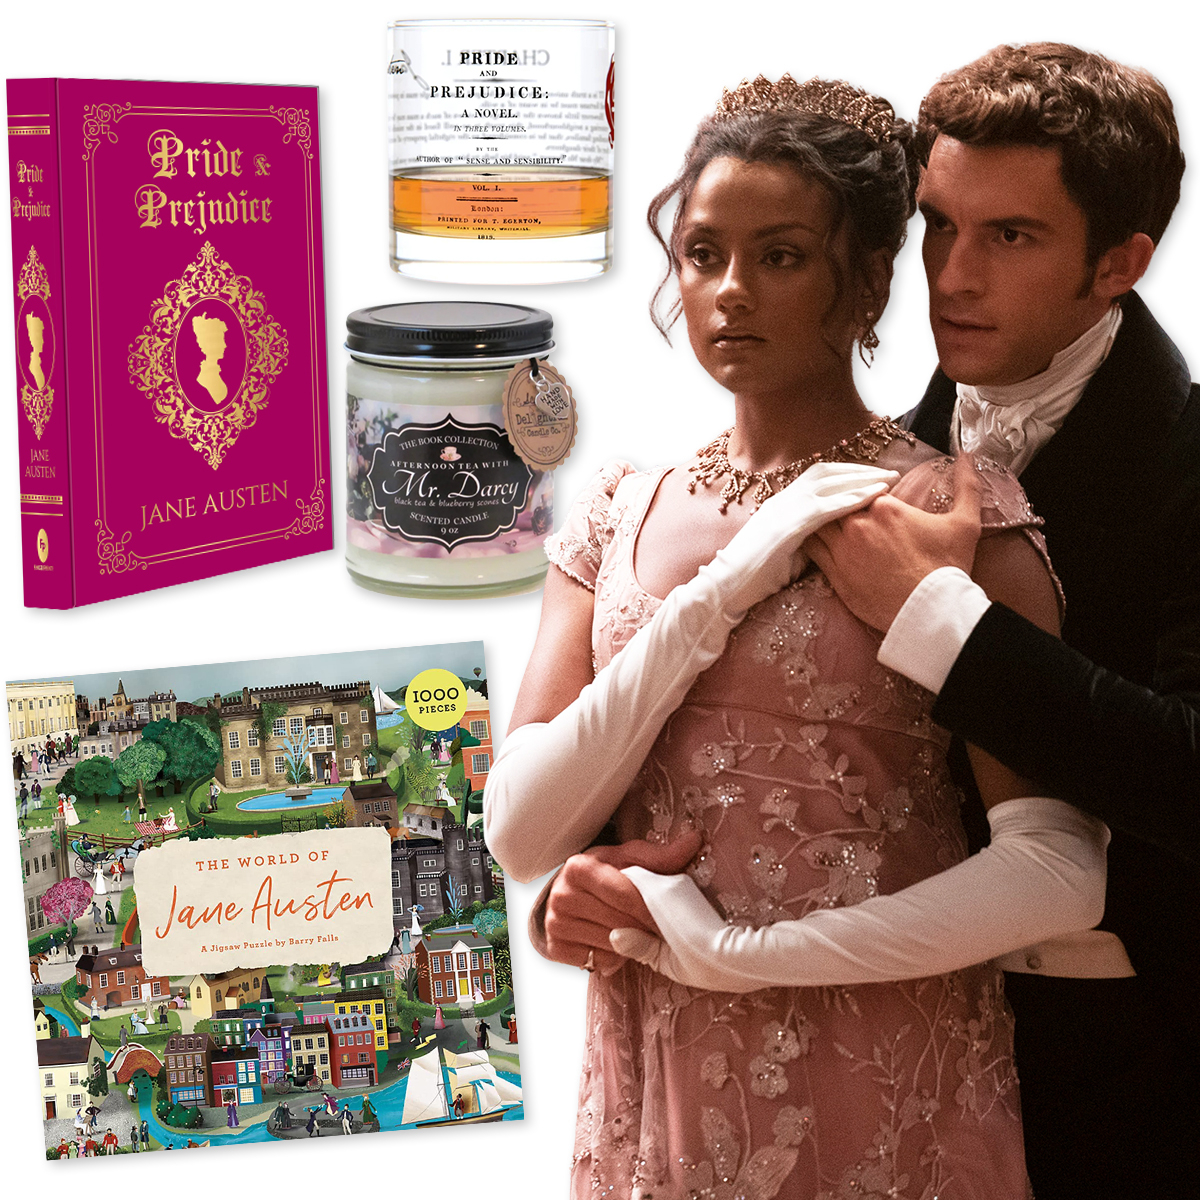 15 Swoon-Worthy Gifts for the Jane Austen Fan in Your Life